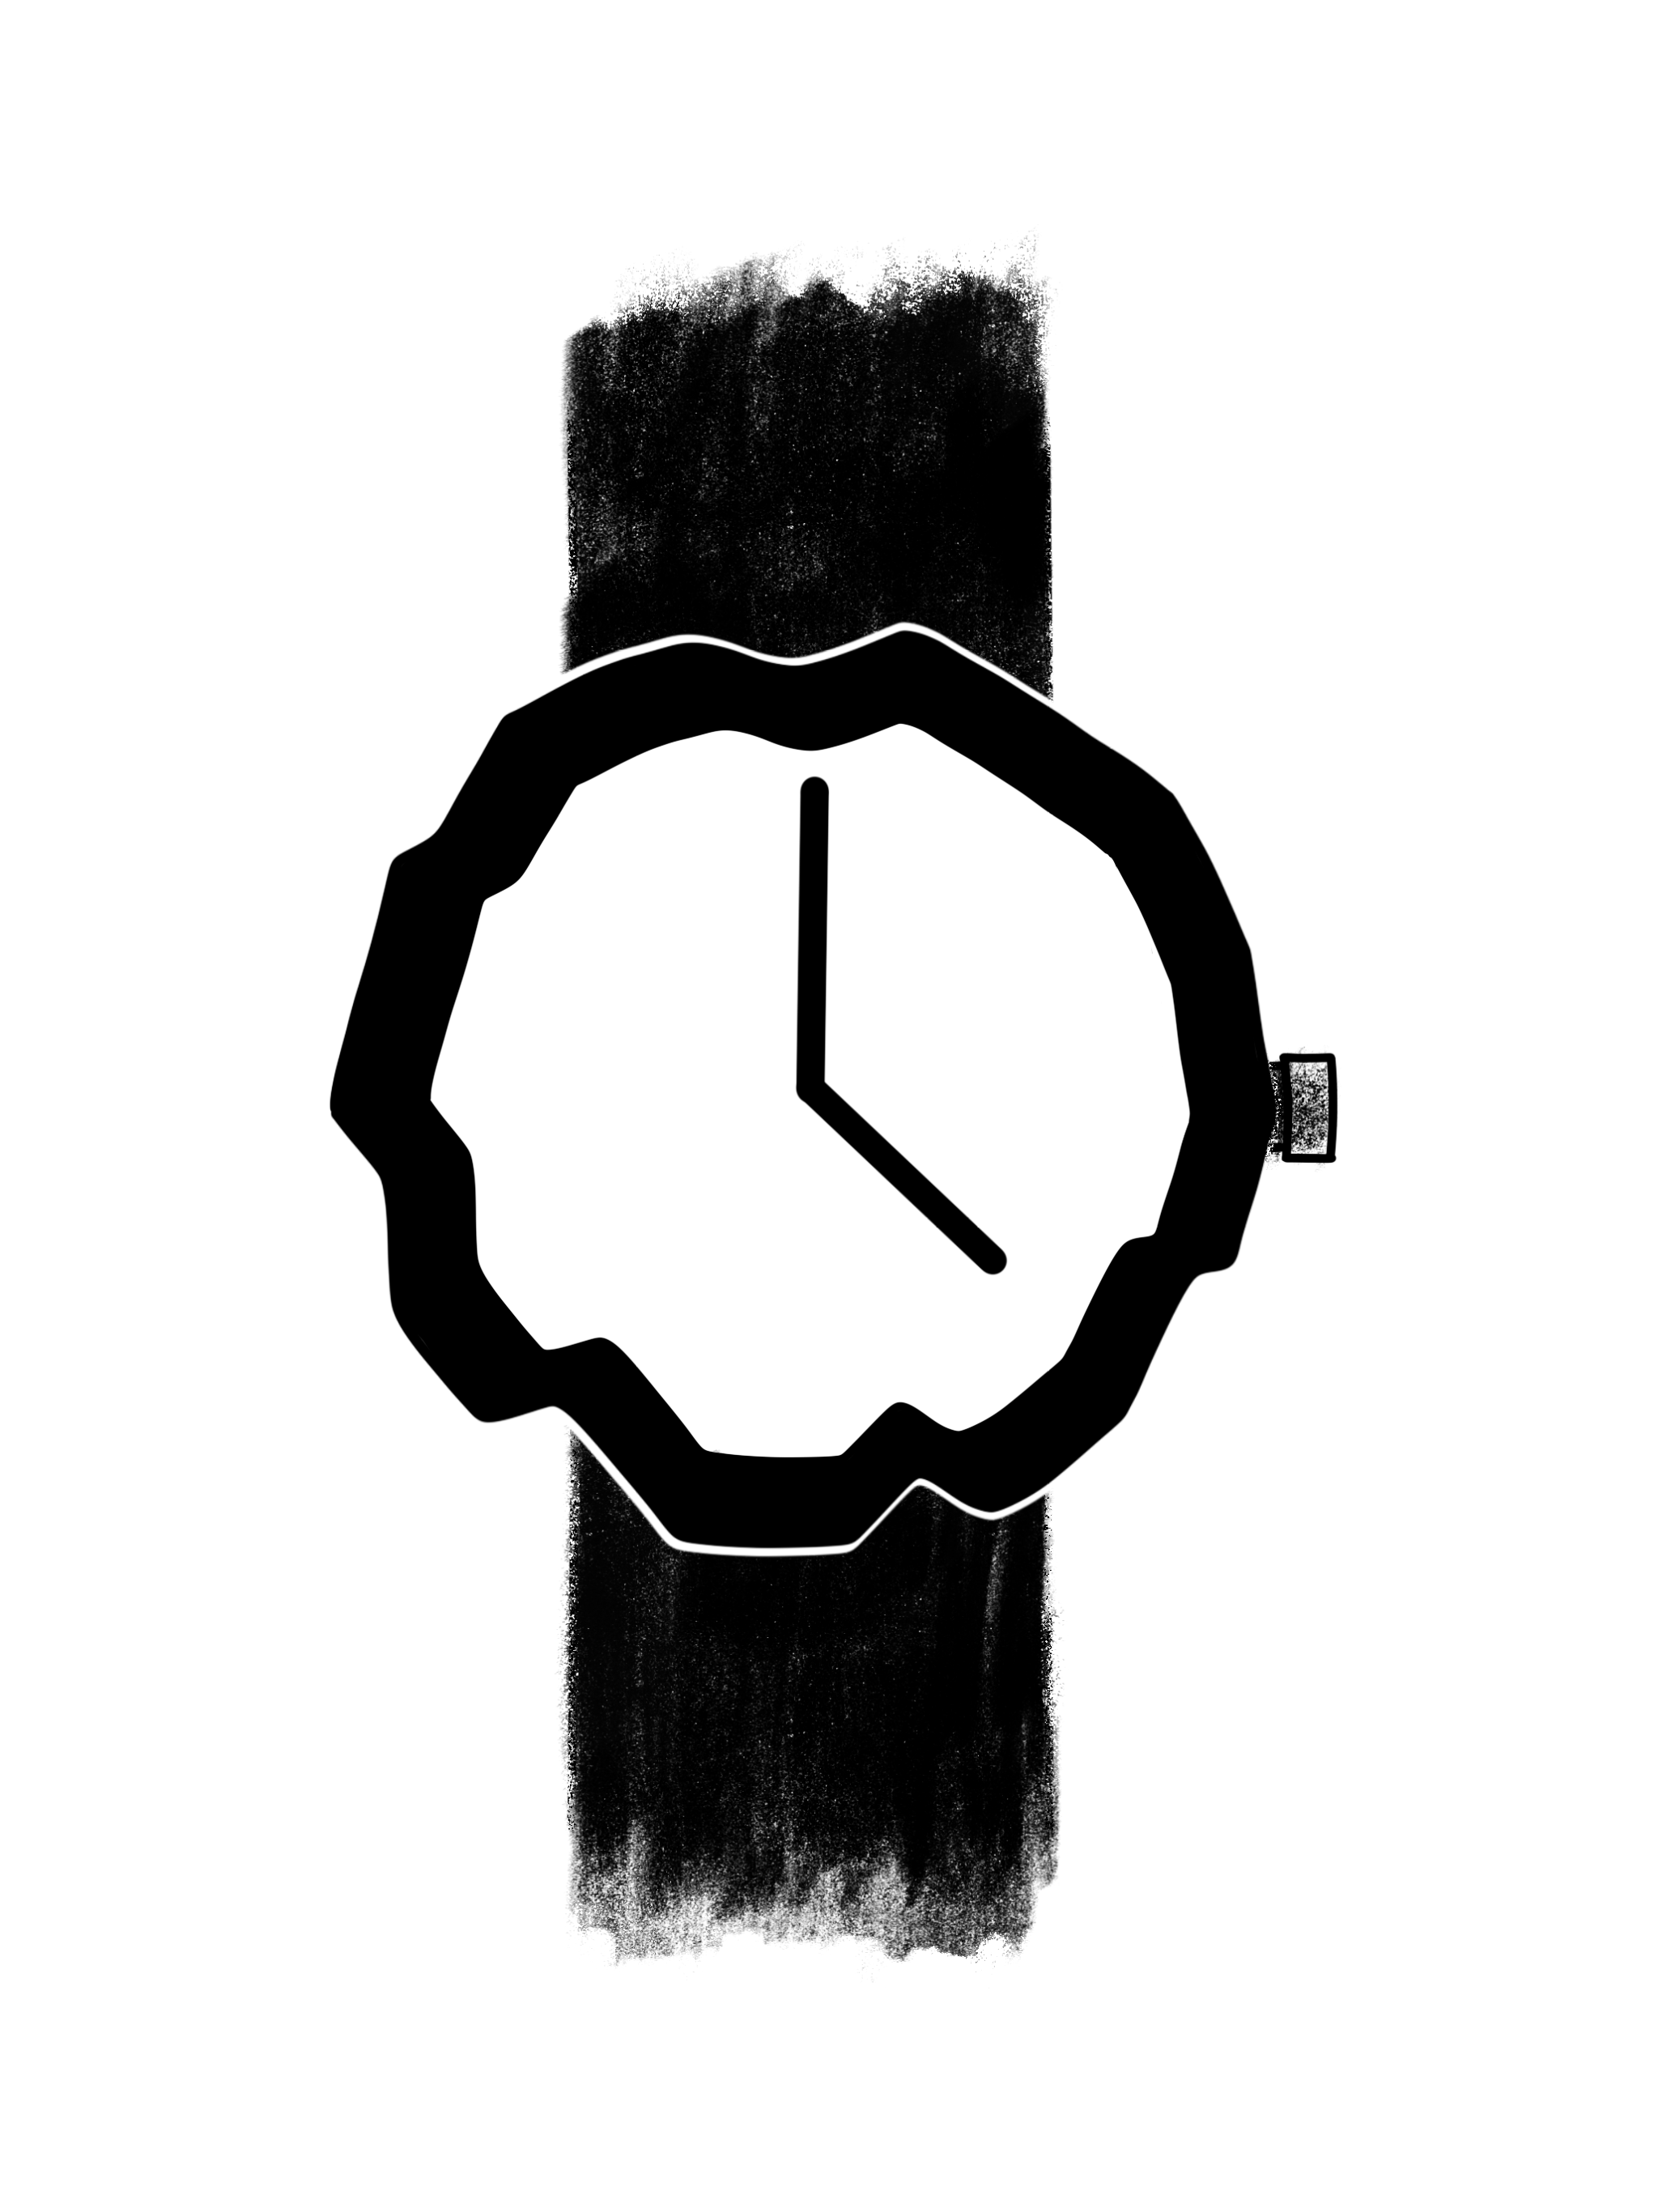 an illustration of a watch design that has rippled edges on the face